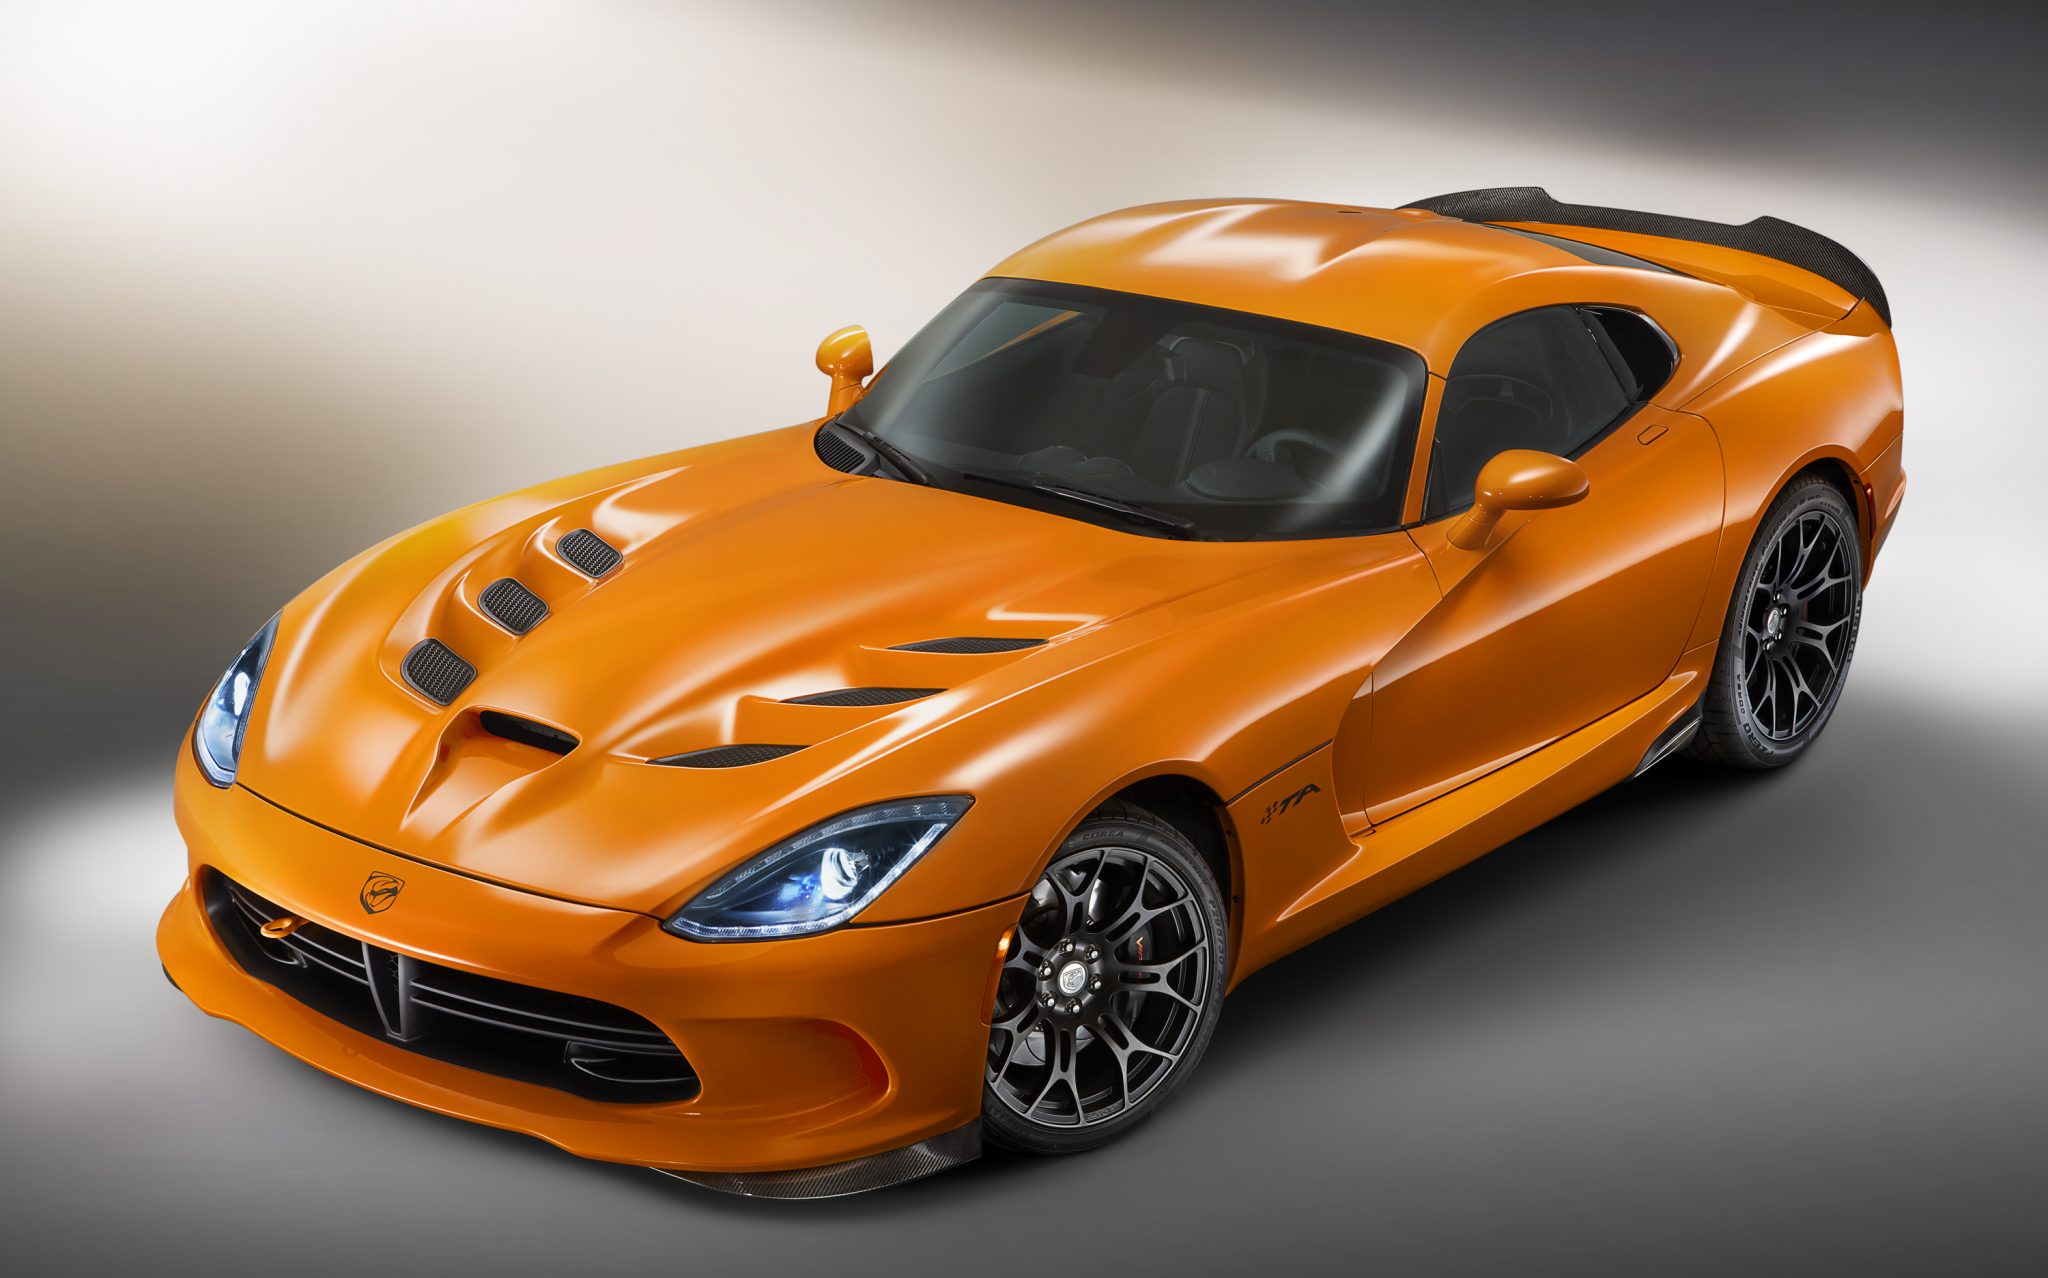 2014 Dodge SRT Viper Coupe Overview - The News Wheel